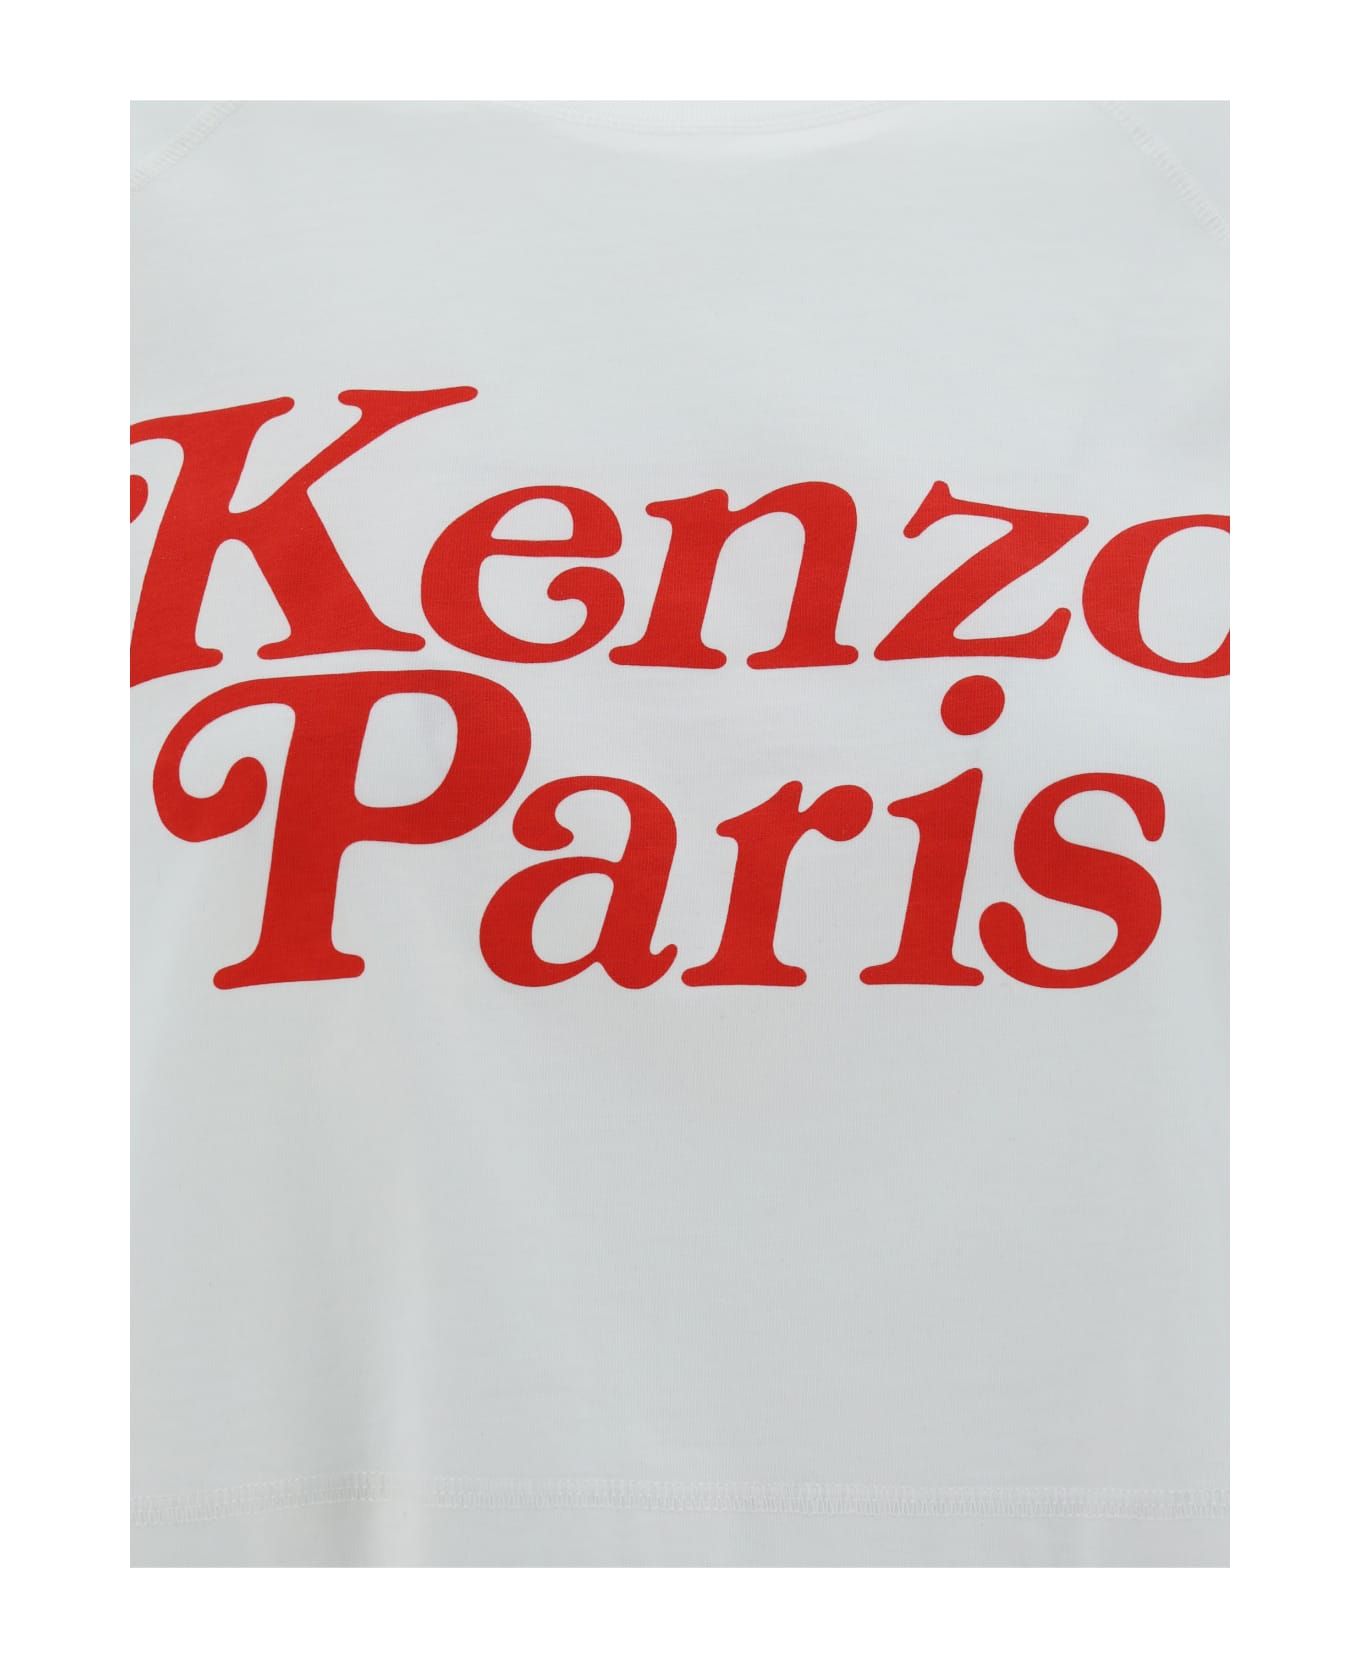 Kenzo By Verdy Cotton Crop Top With Logo - Off White Tシャツ